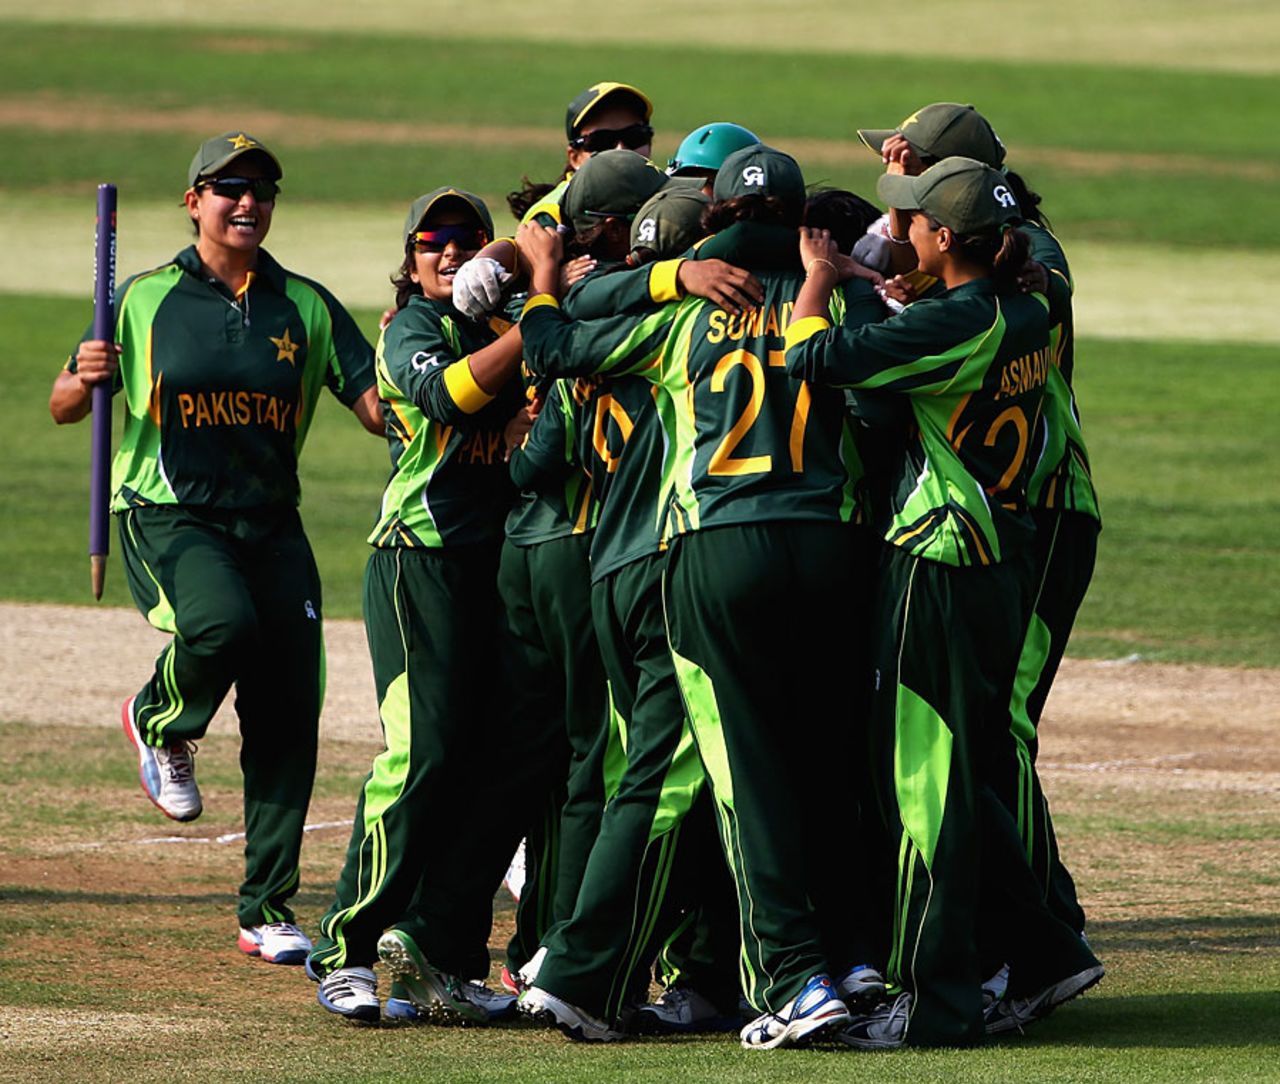 Pakistan celebrate their first victory over England, England v Pakistan, 2nd women's T20, Loughborough, July 5, 2013